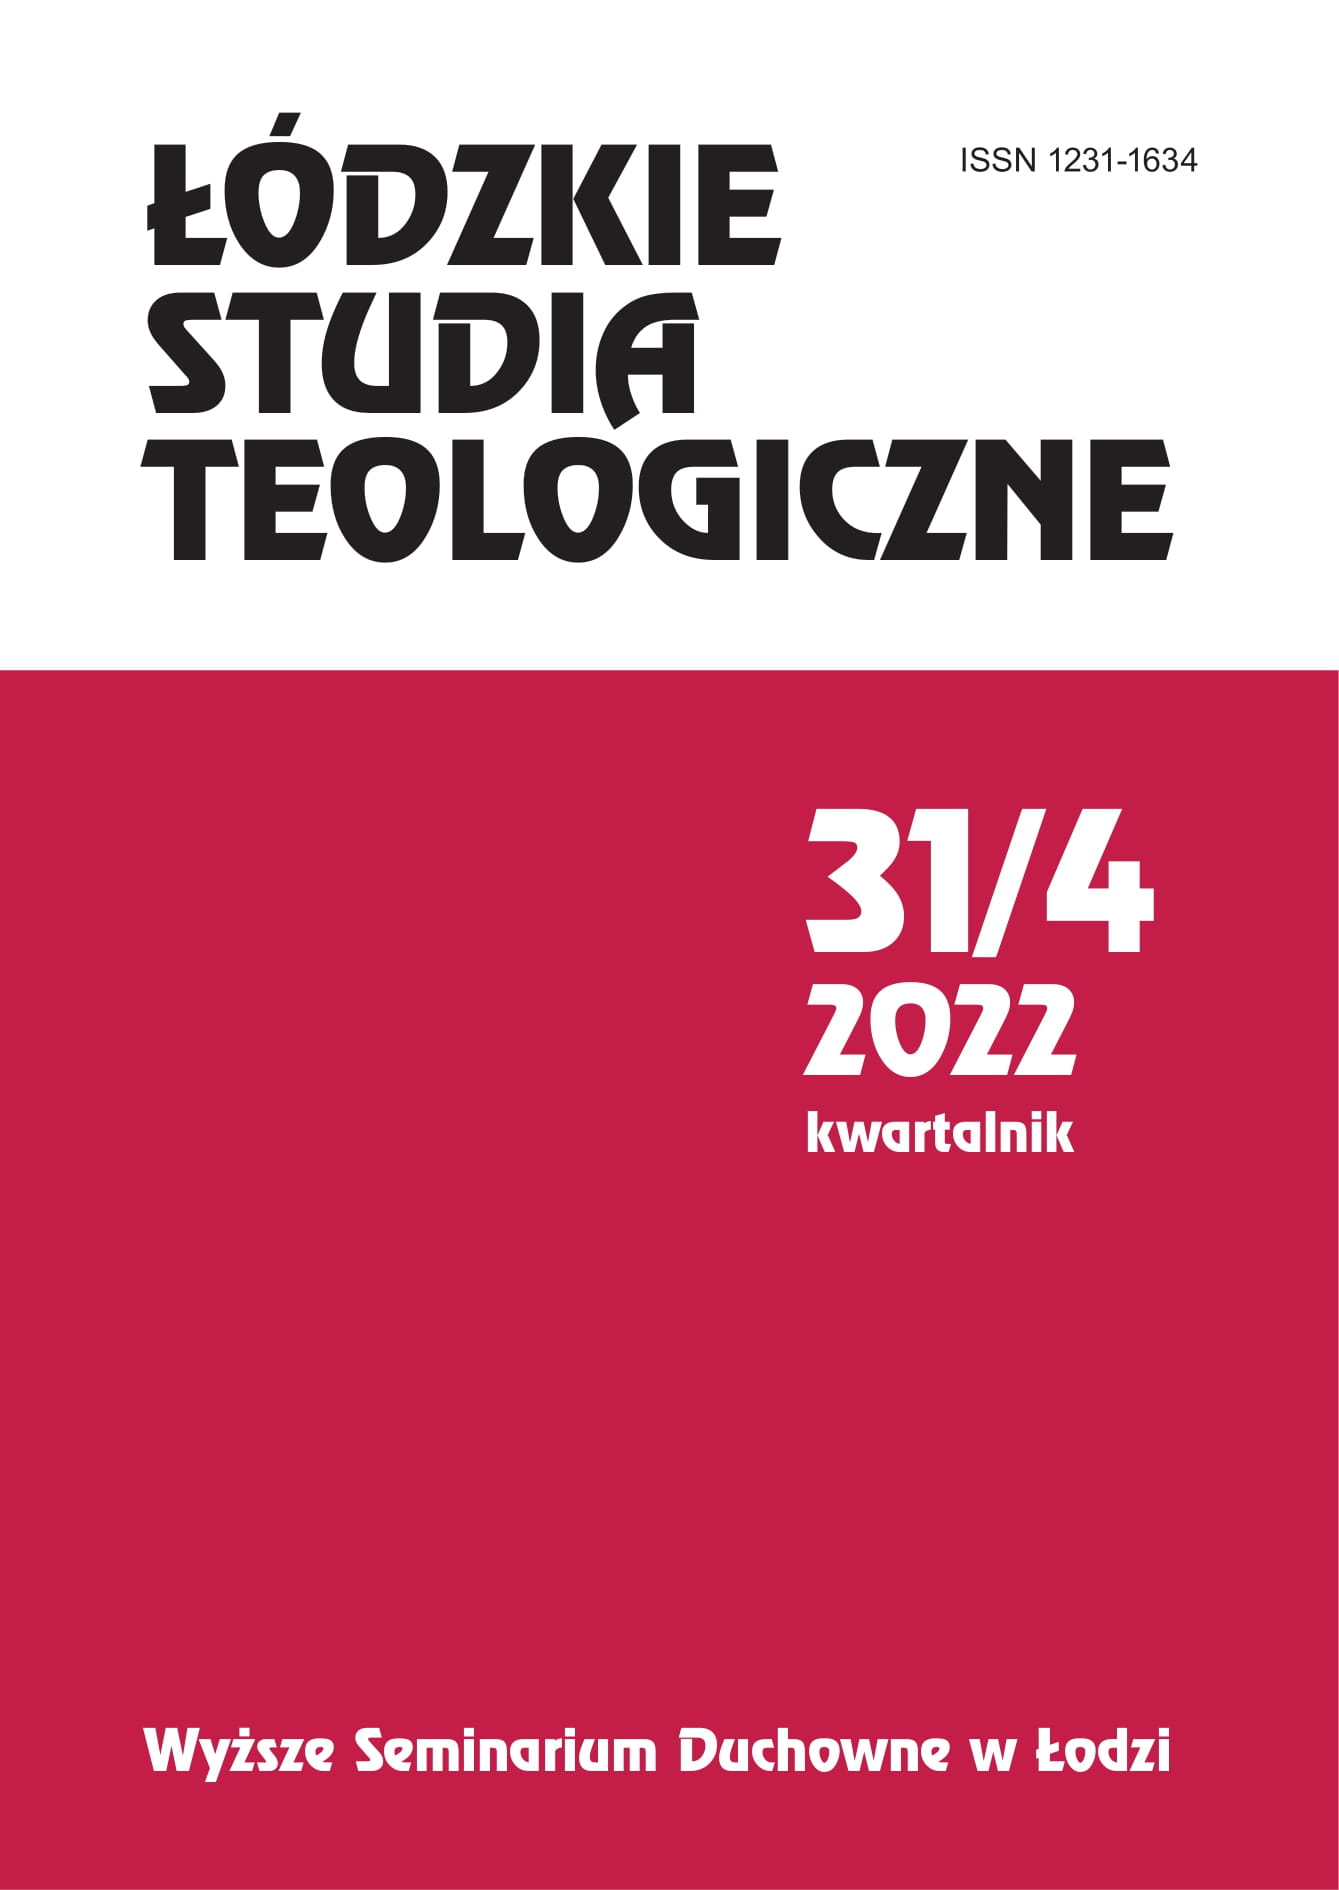 Conditions necessary for admission to theological seminaries, in the period of Second Polish Republic, based on the example of the Higher Theological Seminary in Płock Cover Image